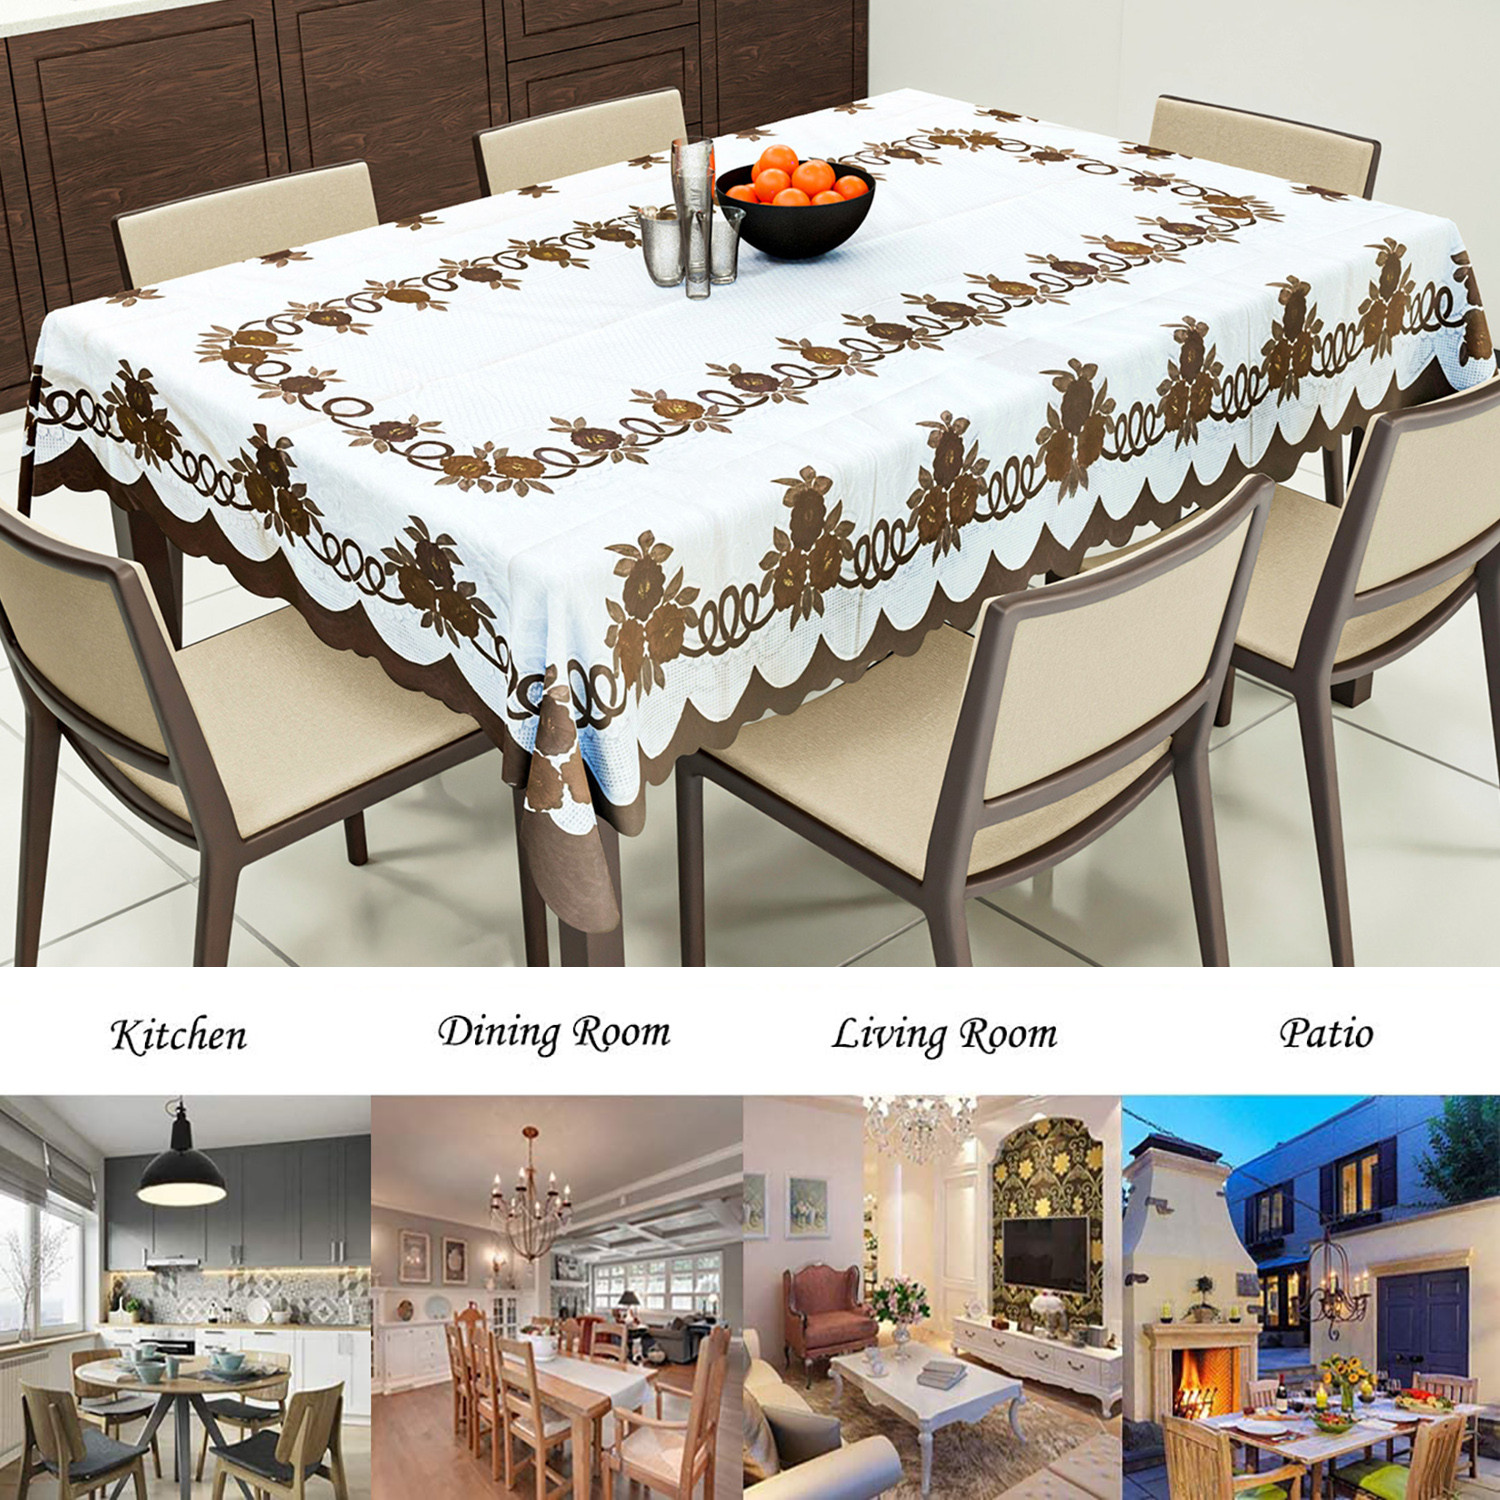 Kuber Industries Cotton Floral Print Waterproof Attractive Dining Table Cover|Tablecloth for Home Decorative, 60x90 Inch (Cream Brown)